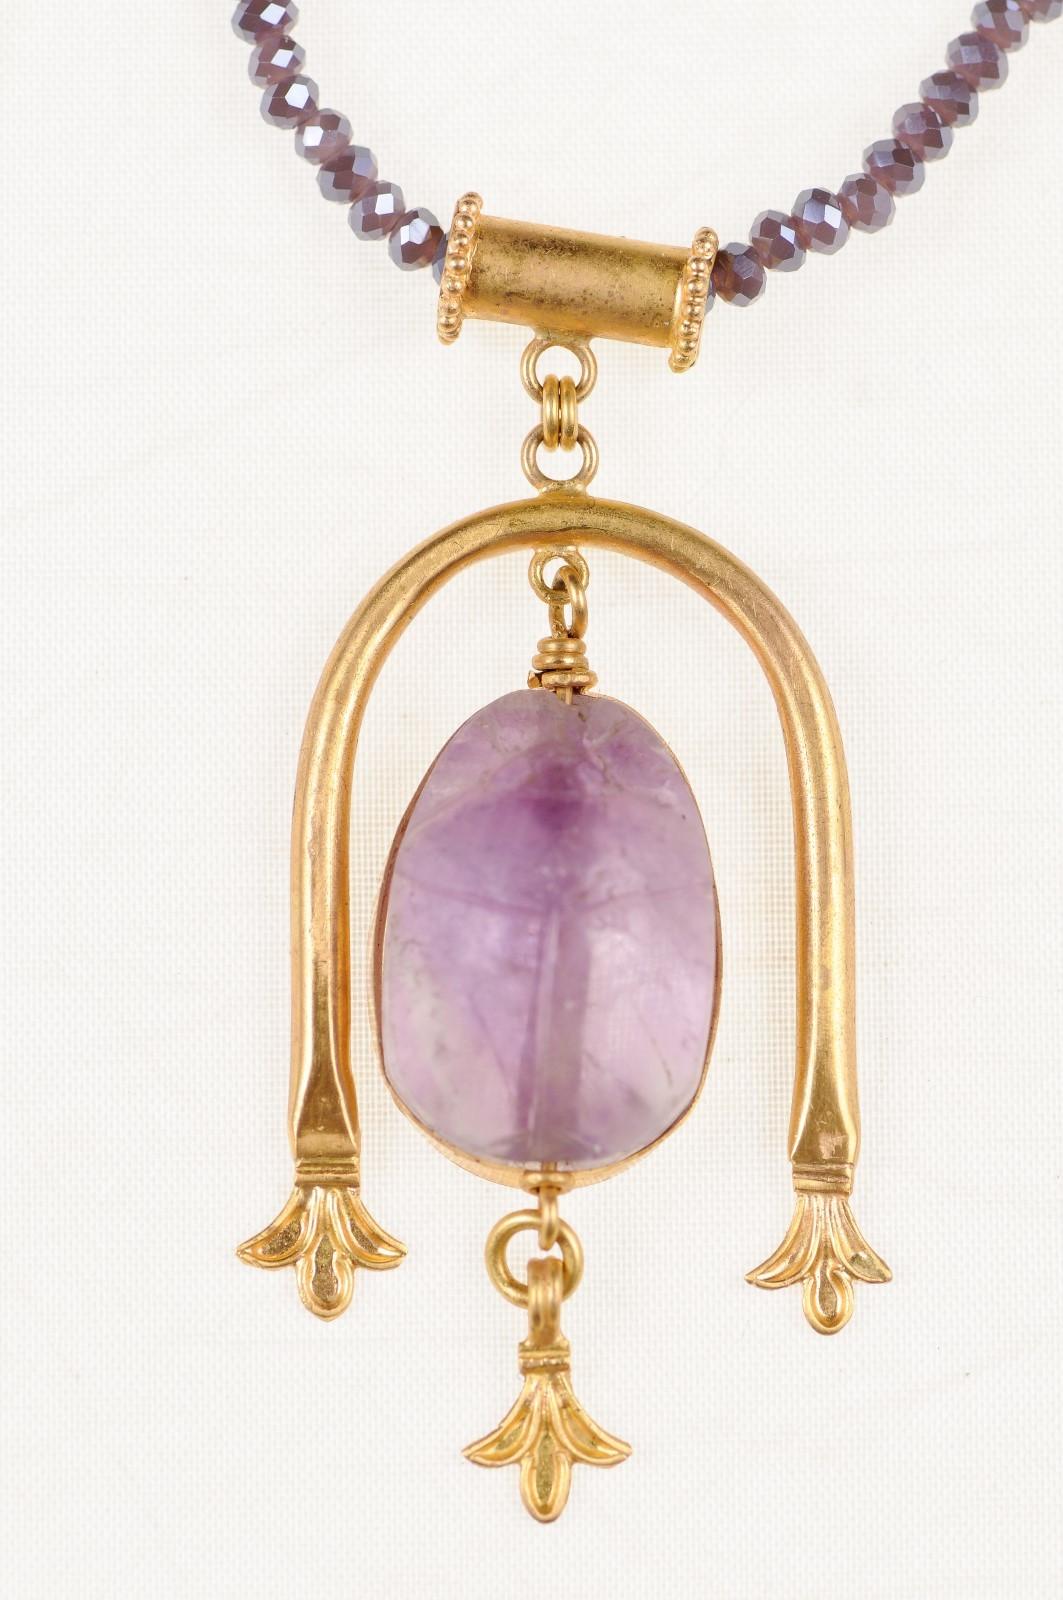 Roman Egyptian 100 AD Lavender Colored Scarab and 21-Karat Gold Pendant For Sale 4